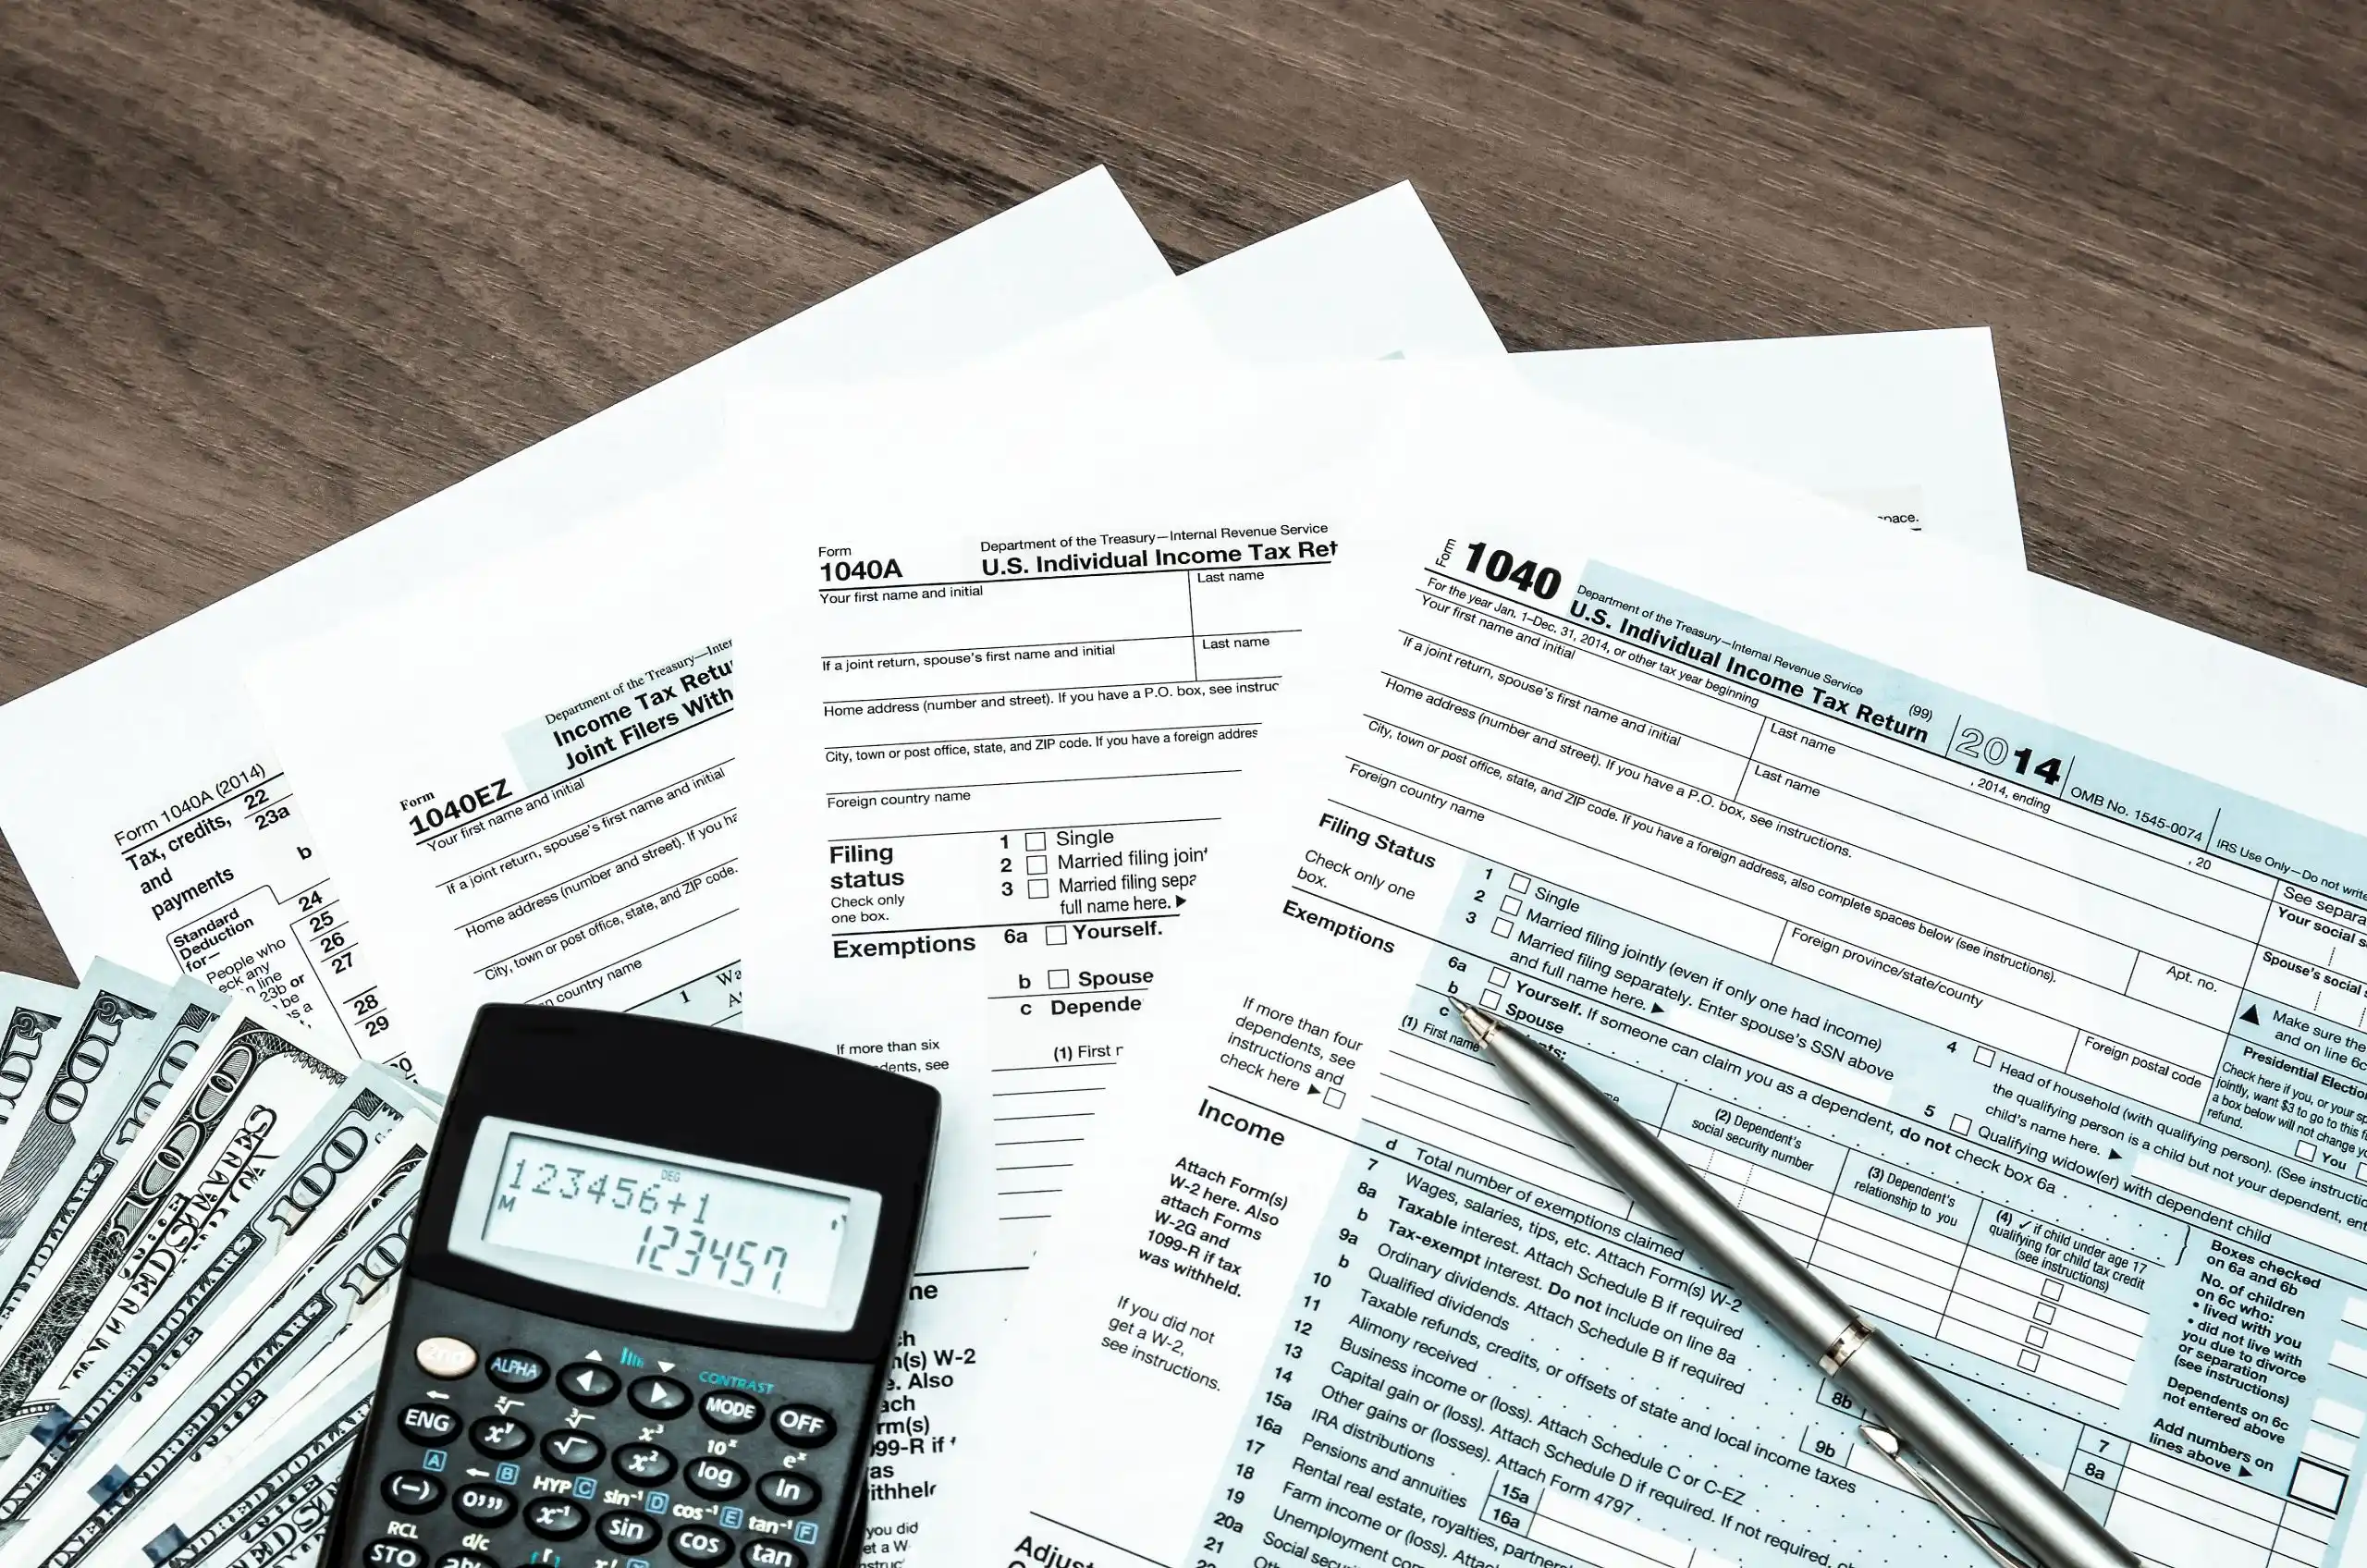 Why Does The IRS Want You To File Your Taxes As Early as Possible?